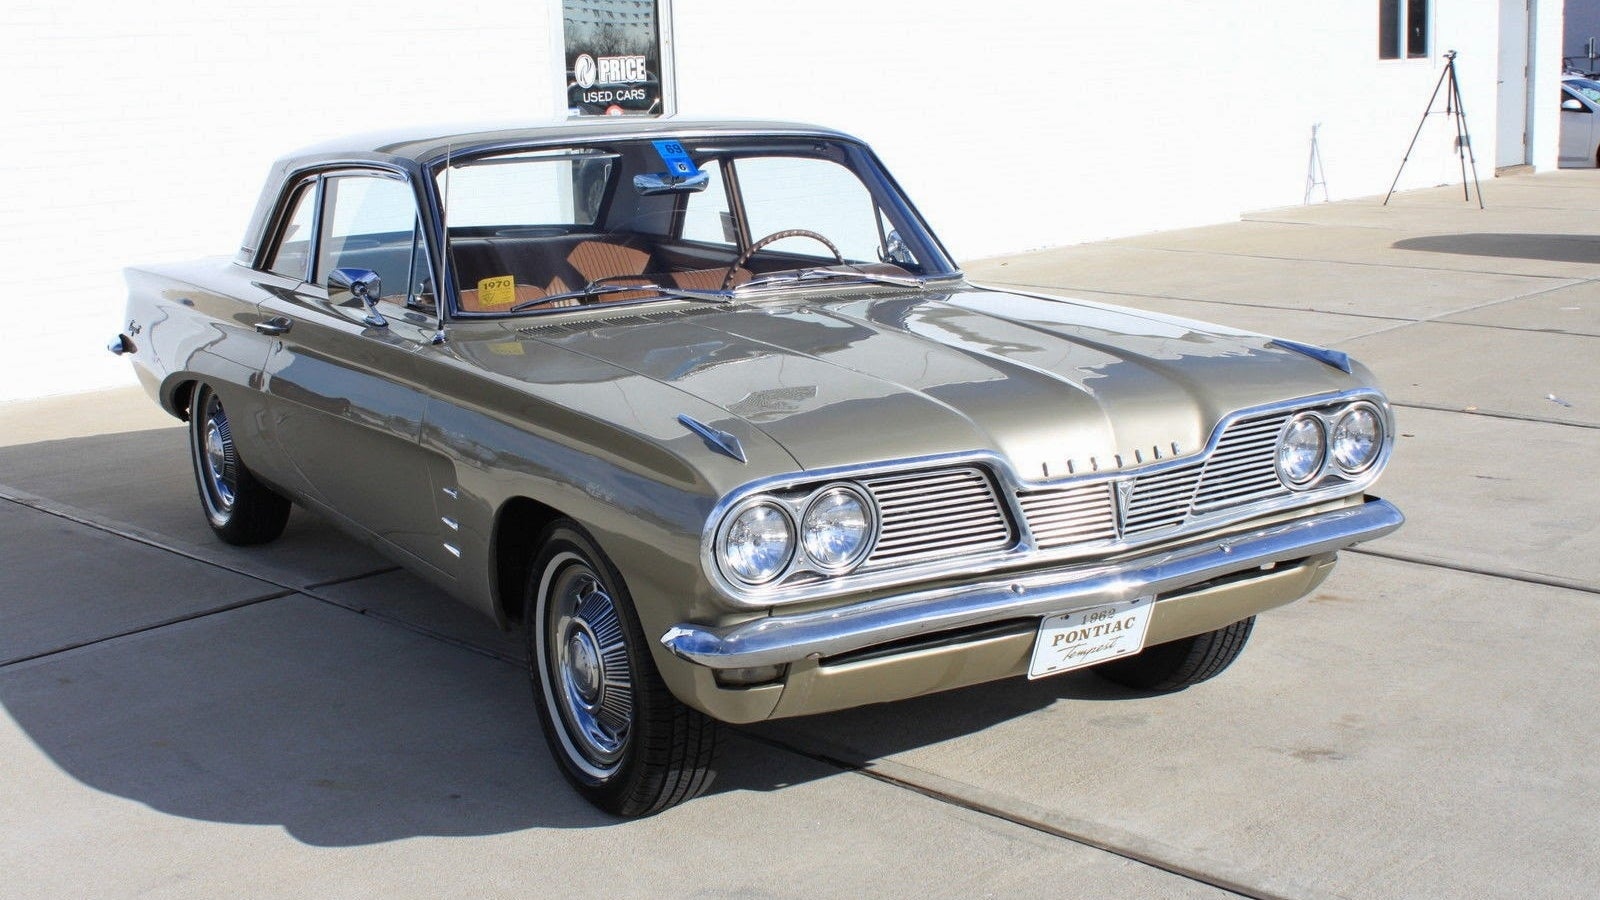 Who Stole 4 Cylinders From This 1962 Pontiac Tempest